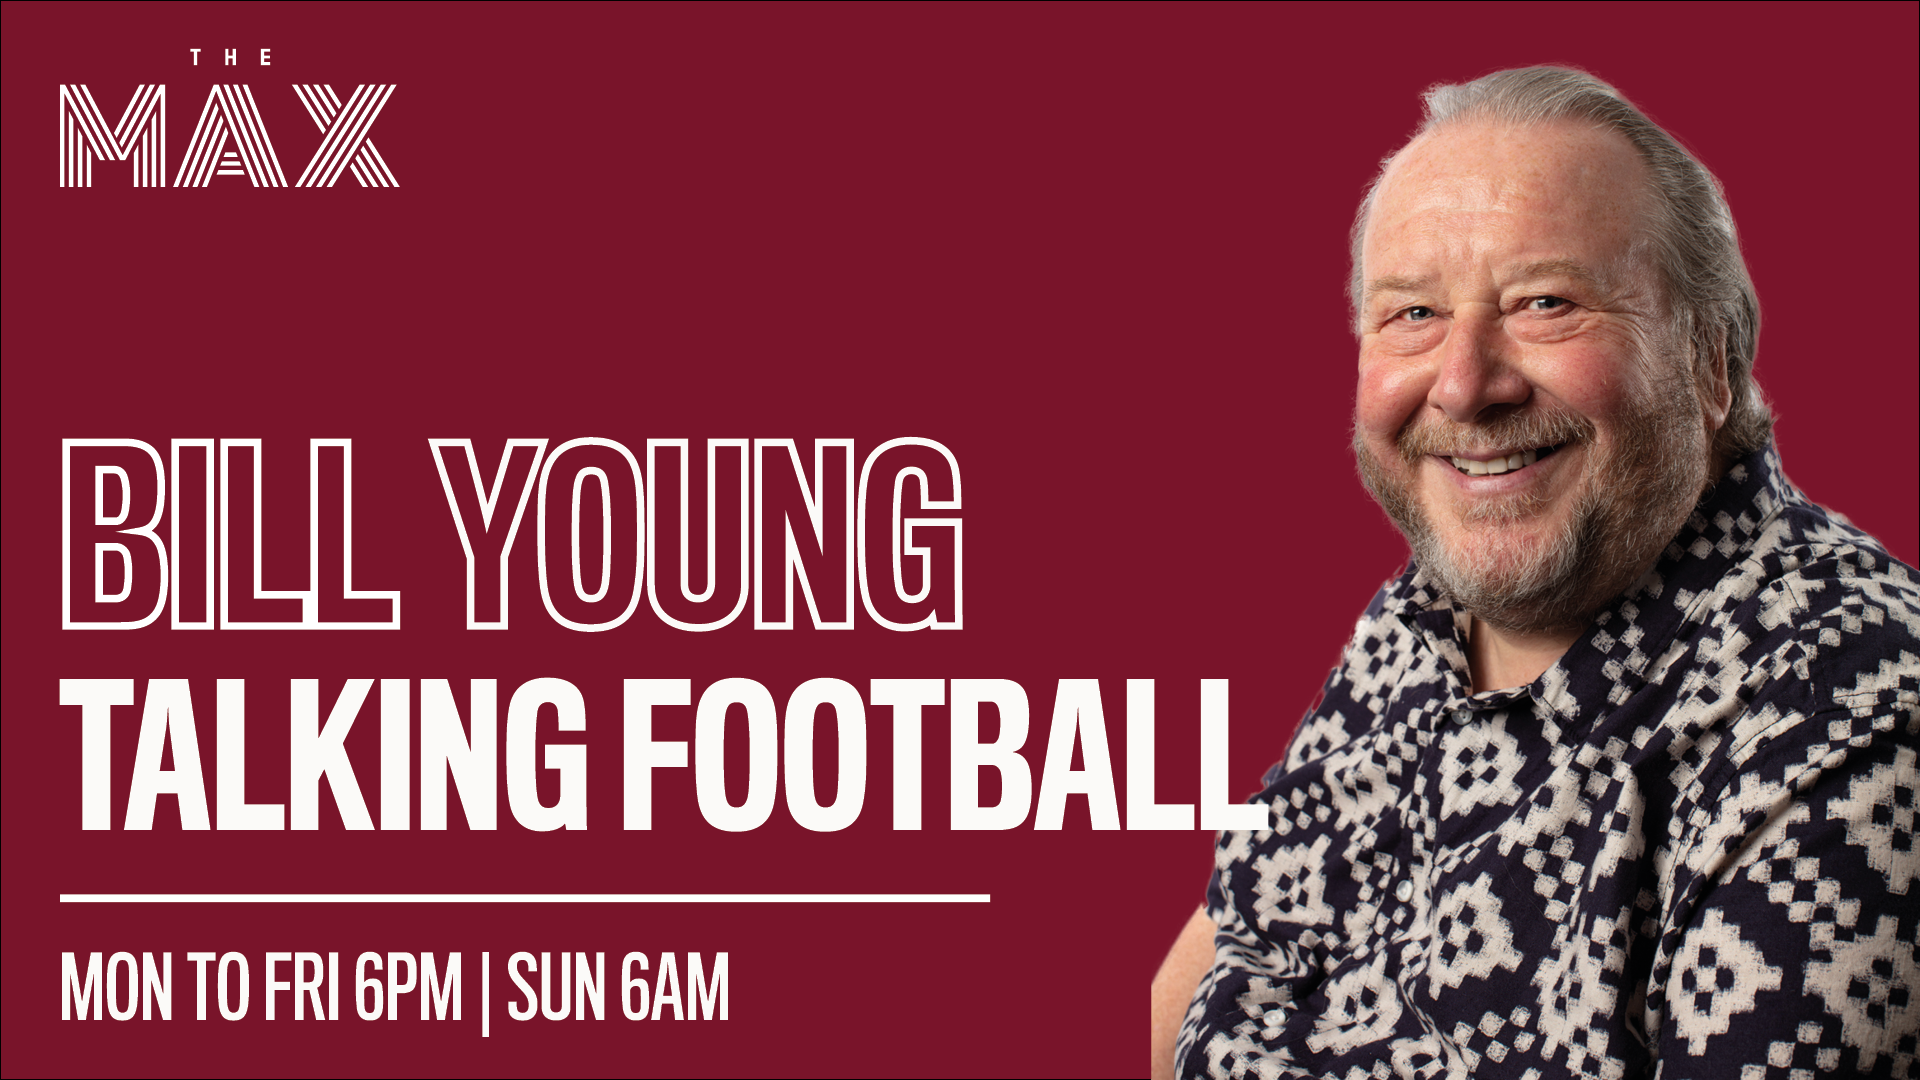 Talking Football with Bill Young - Tuesday 4th May